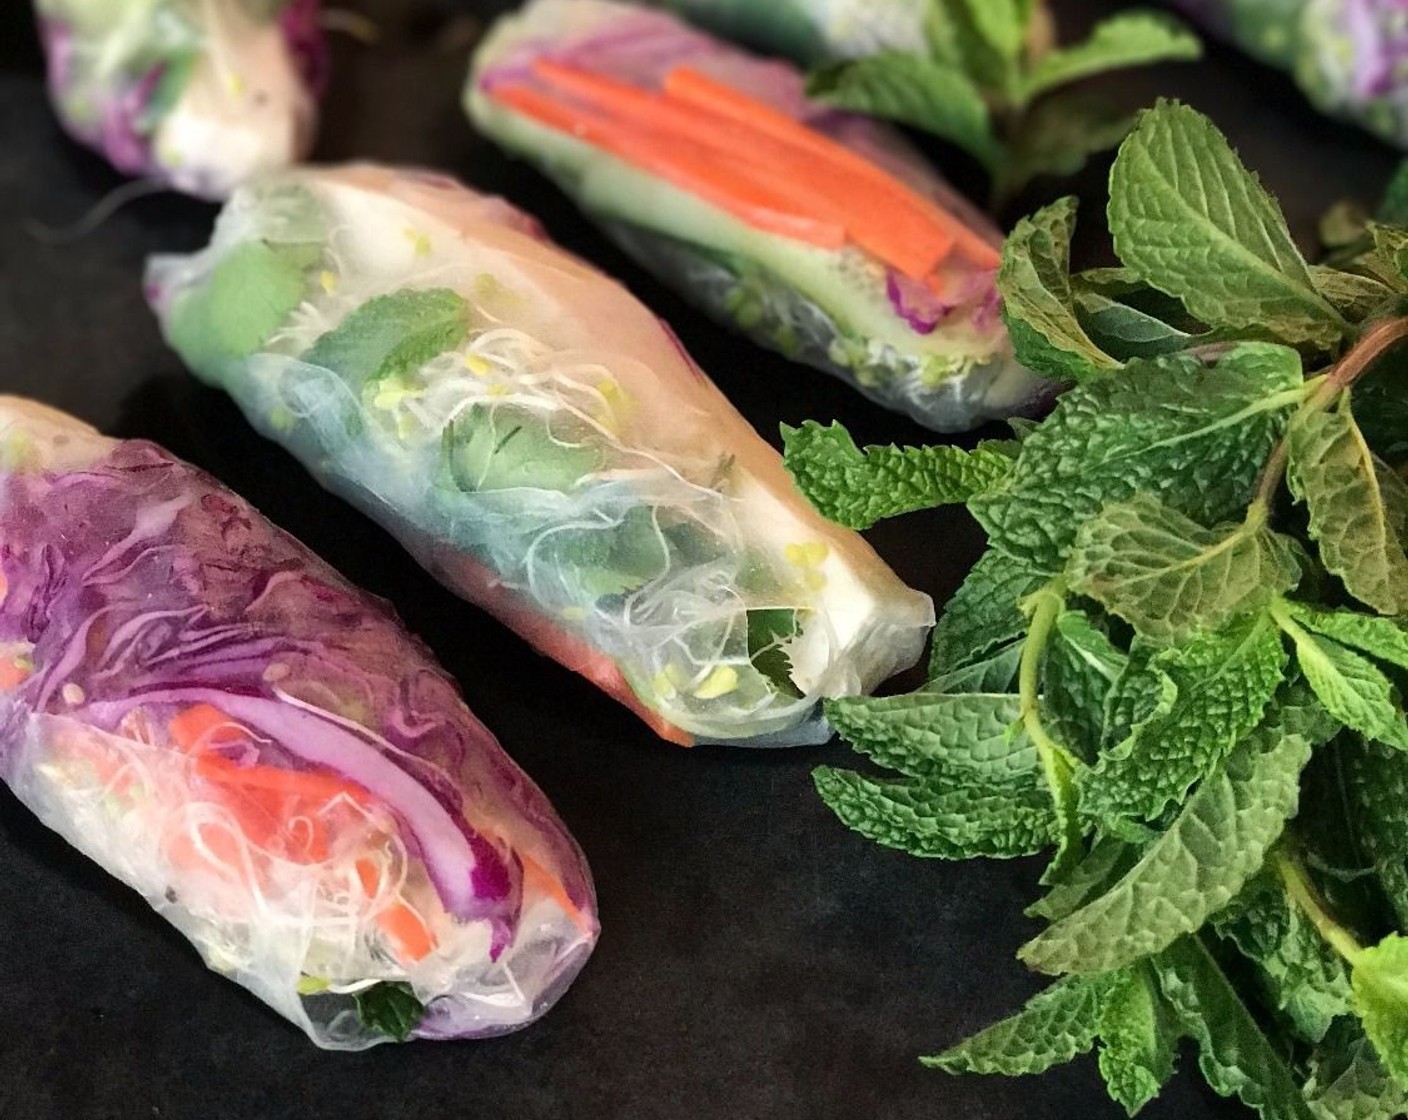 step 5 Spring Rolls: Pour water into a shallow dish and dip the Rice Paper Wrappers (16) for 2-3 seconds per side. Transfer to a damp cutting board. Add tofu, Alfalfa Sprouts (3/4 cup), carrots, cucumber, red cabbage, Fresh Cilantro (1 bunch), Fresh Mint (1 bunch) and Lettuce (to taste) to your liking. They don't all need to be the same. Gently roll like a burrito. Cover with a damp towel to keep fresh.​ Enjoy!